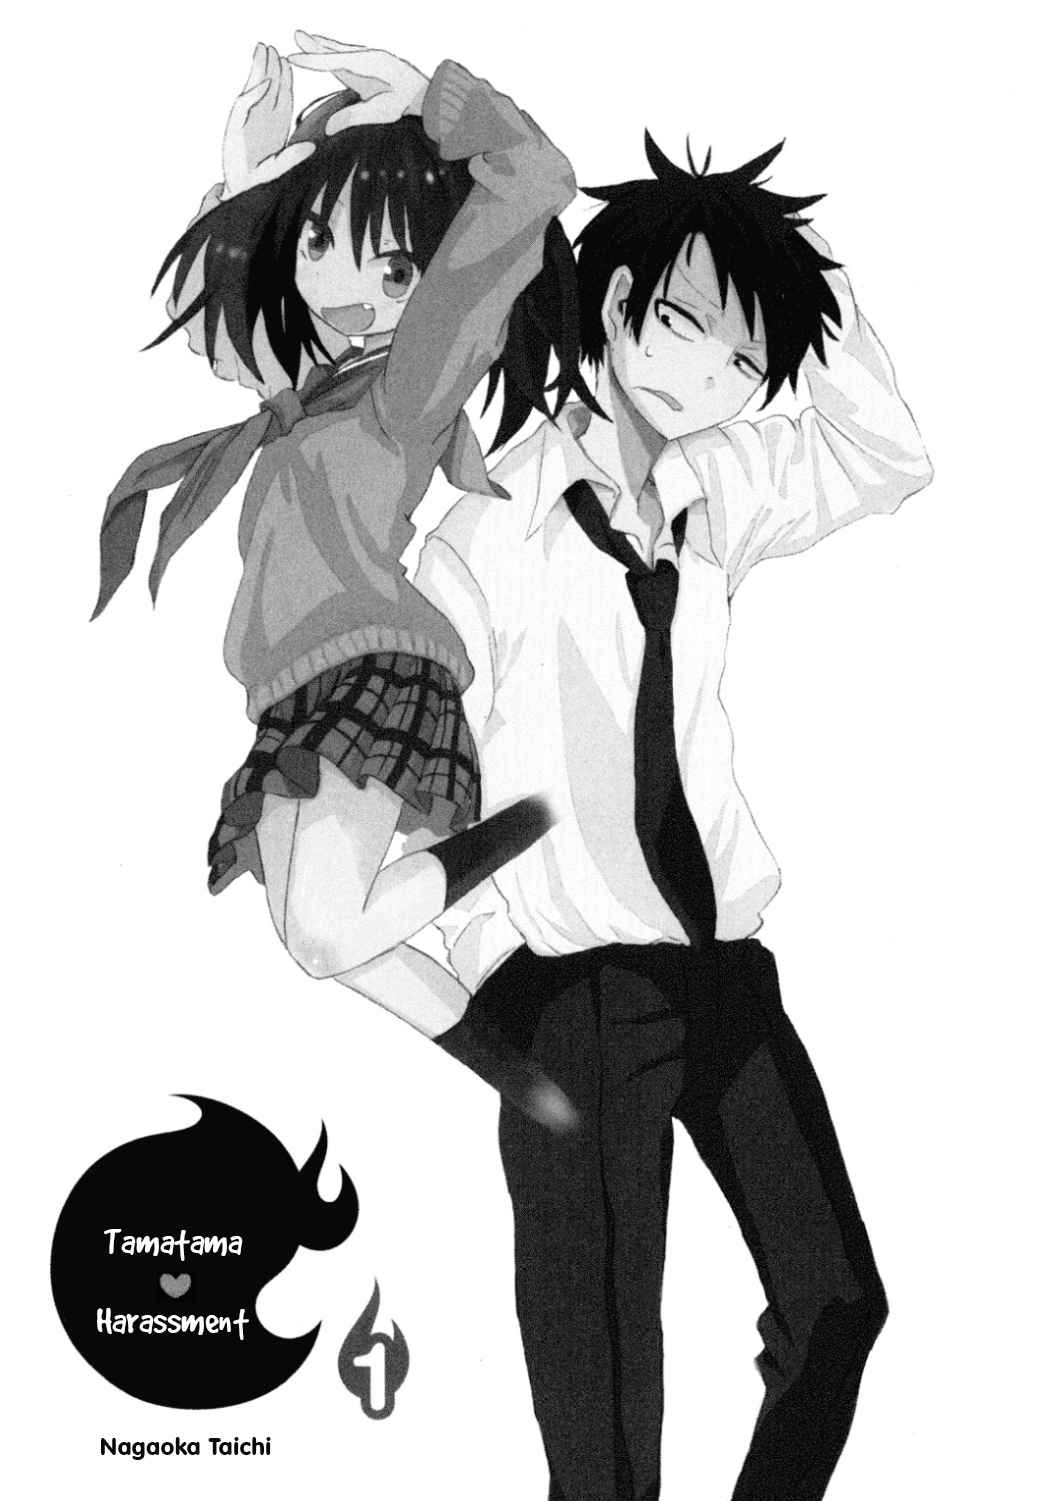 Tamatama Harassment Vol. 1 Ch. 1 Gotta do Something About This...